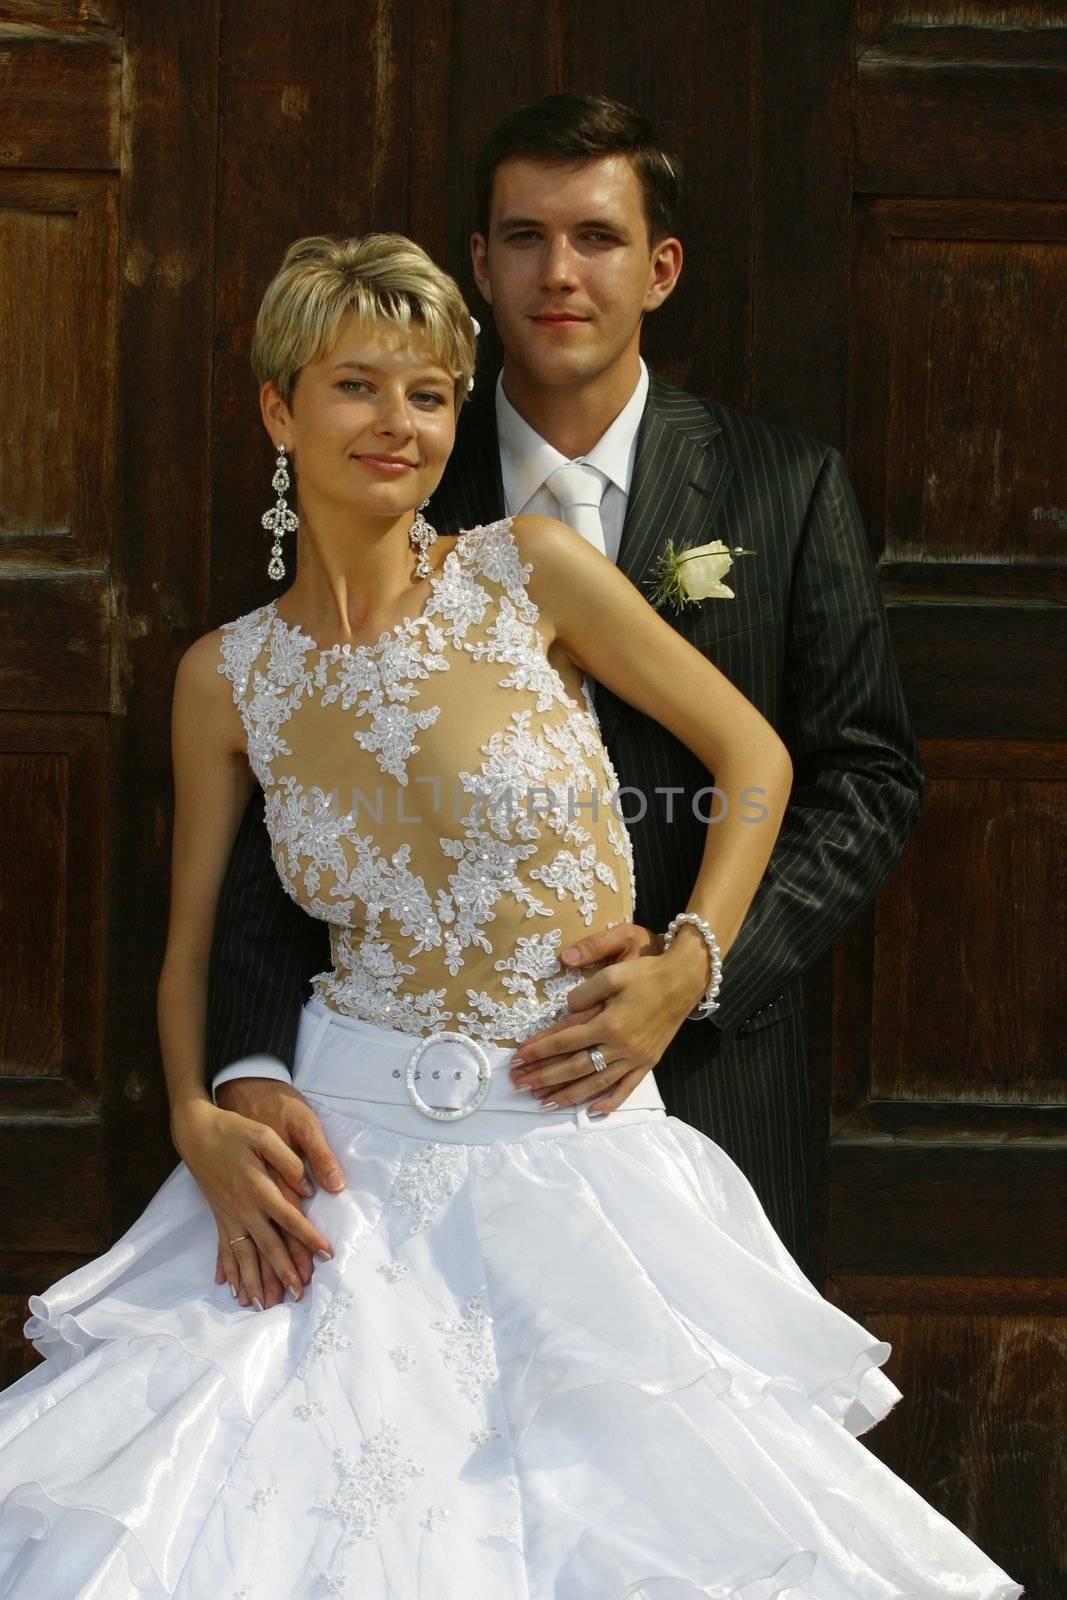 Beautiful newly married pair on a background of a wooden door